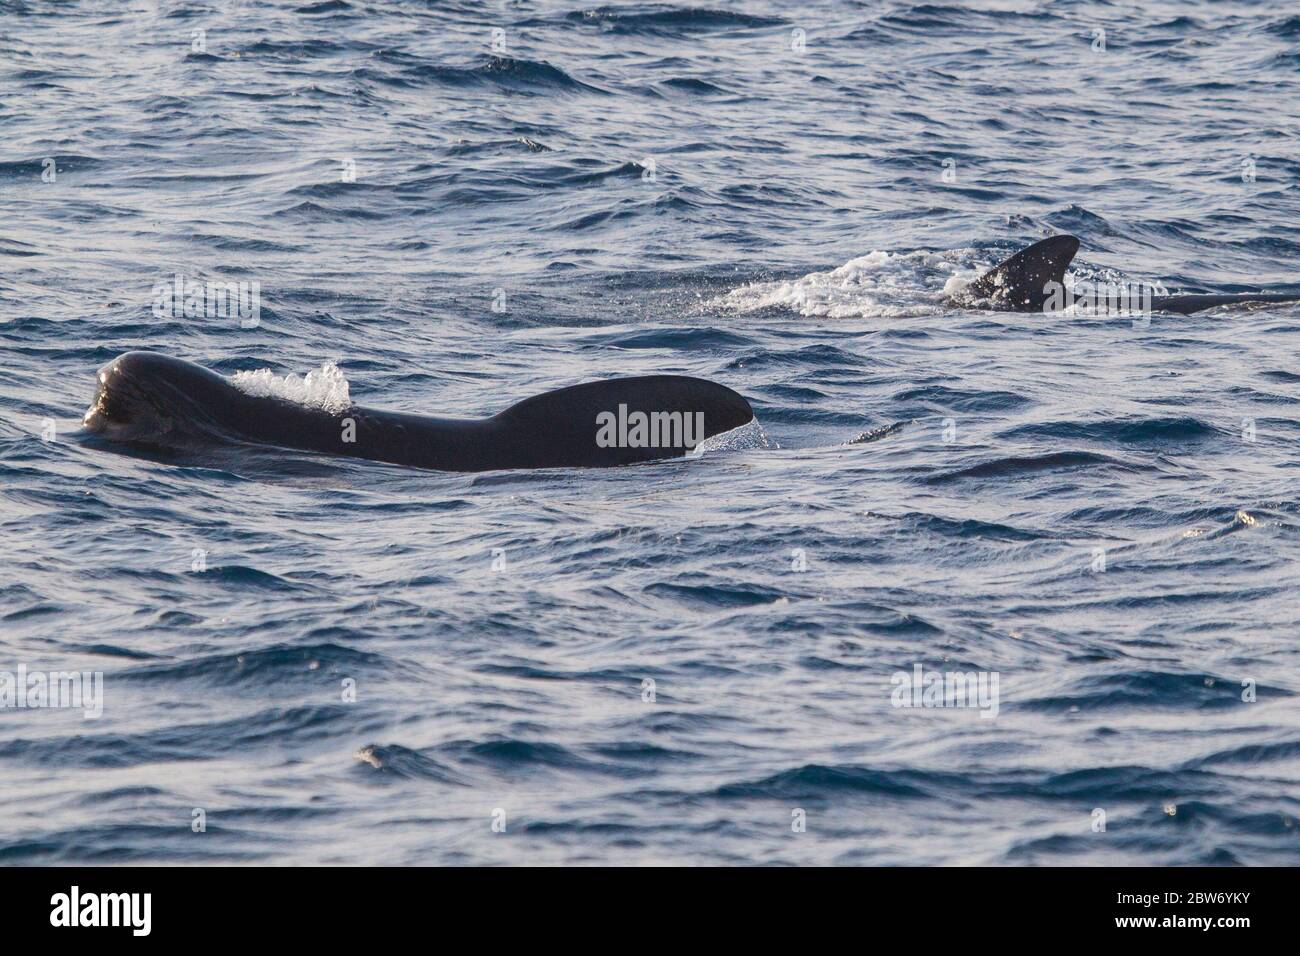 Two long-finned pilot whale (Globicephala melas), one of the the largest species of all oceanic dolphins, in the Atlantic Ocean. Stock Photo